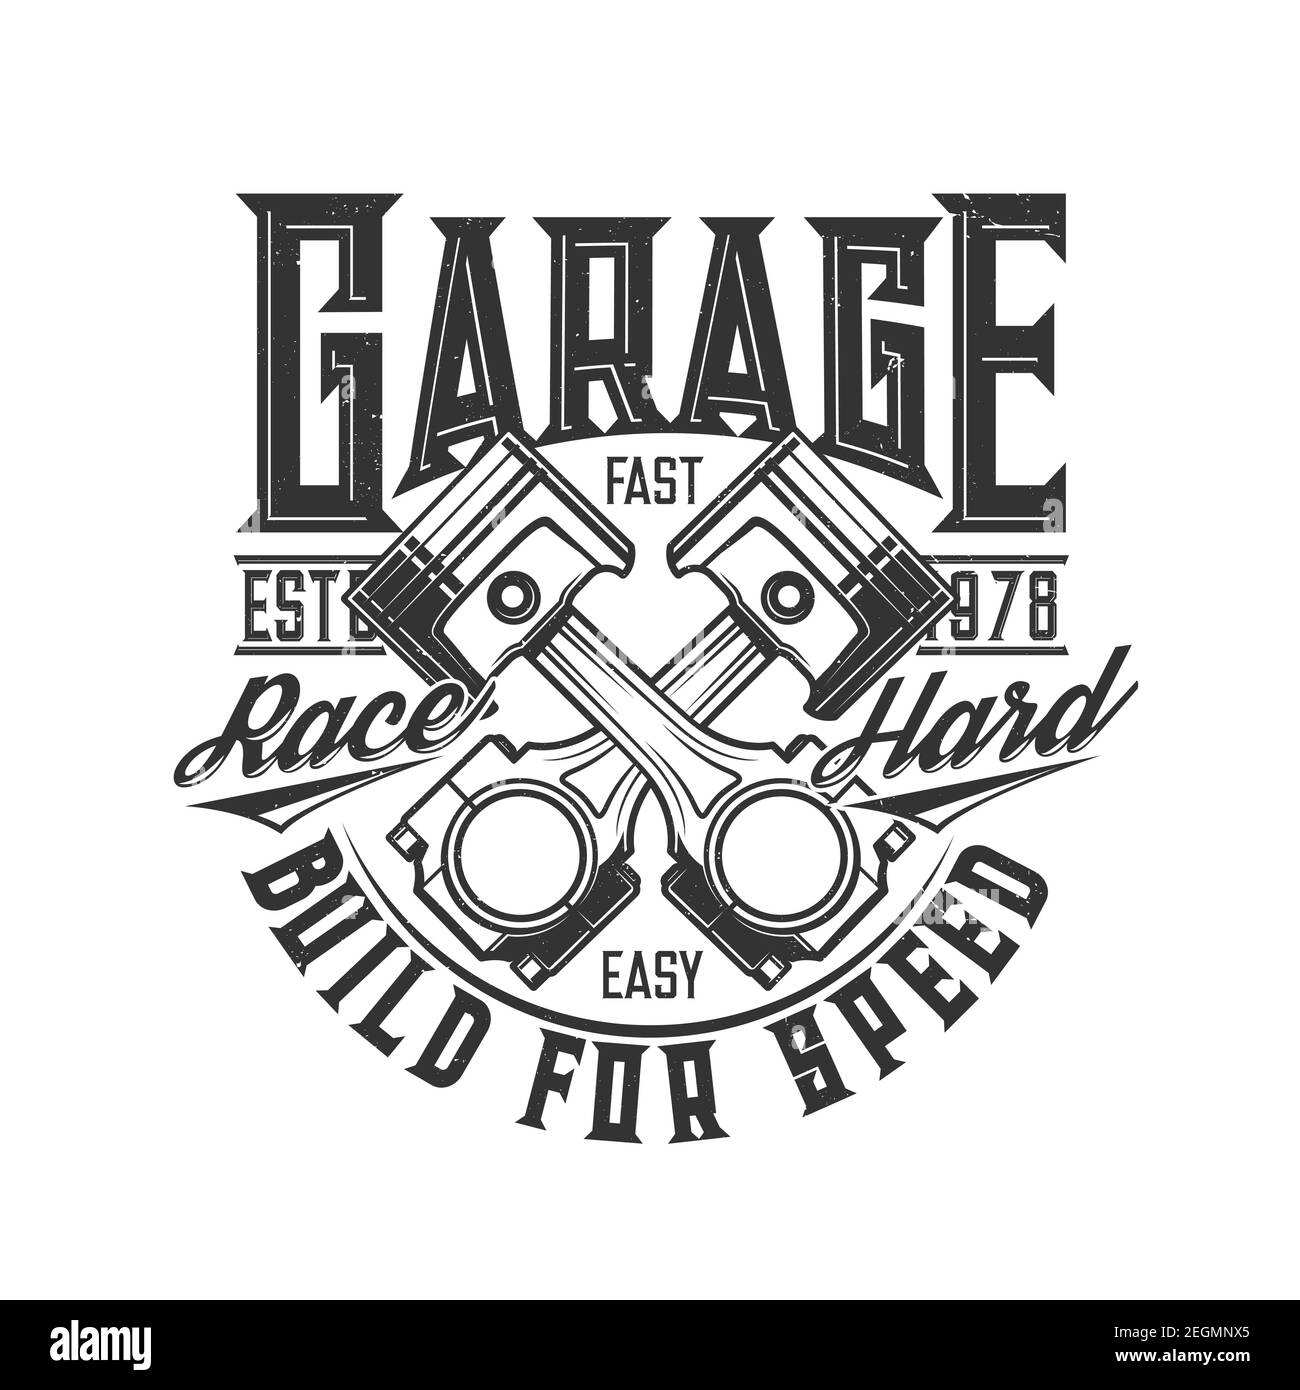 Motorcycle and car custom garage, moto races vector icon. Bike chopper racers or bikers club emblem with motor engine pistons, Build for Speed and Rac Stock Vector